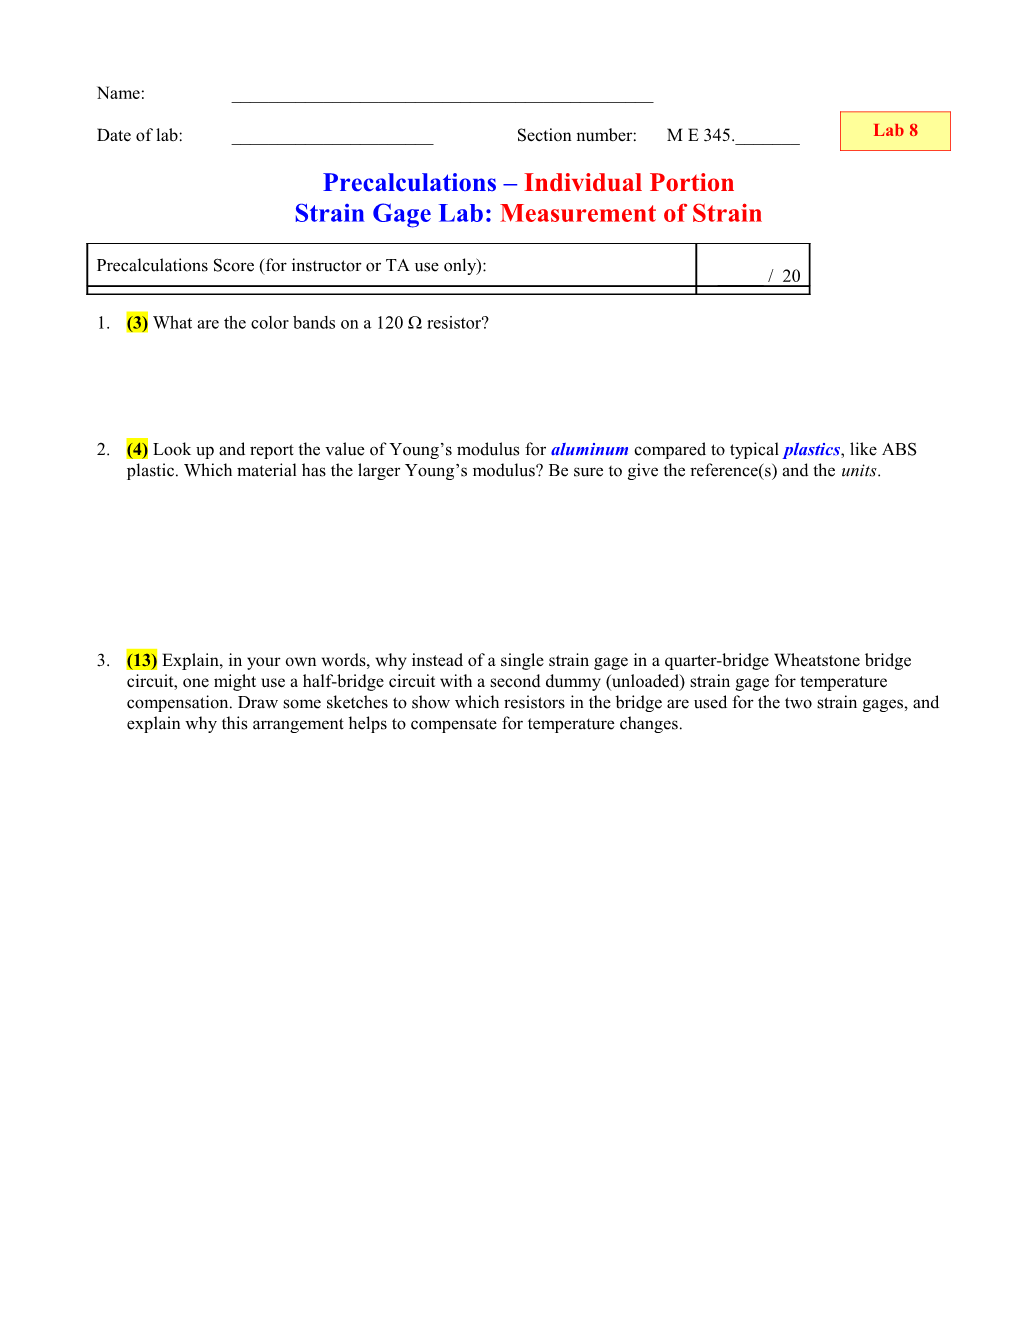 Cover Page for Precalculations Individual Portion